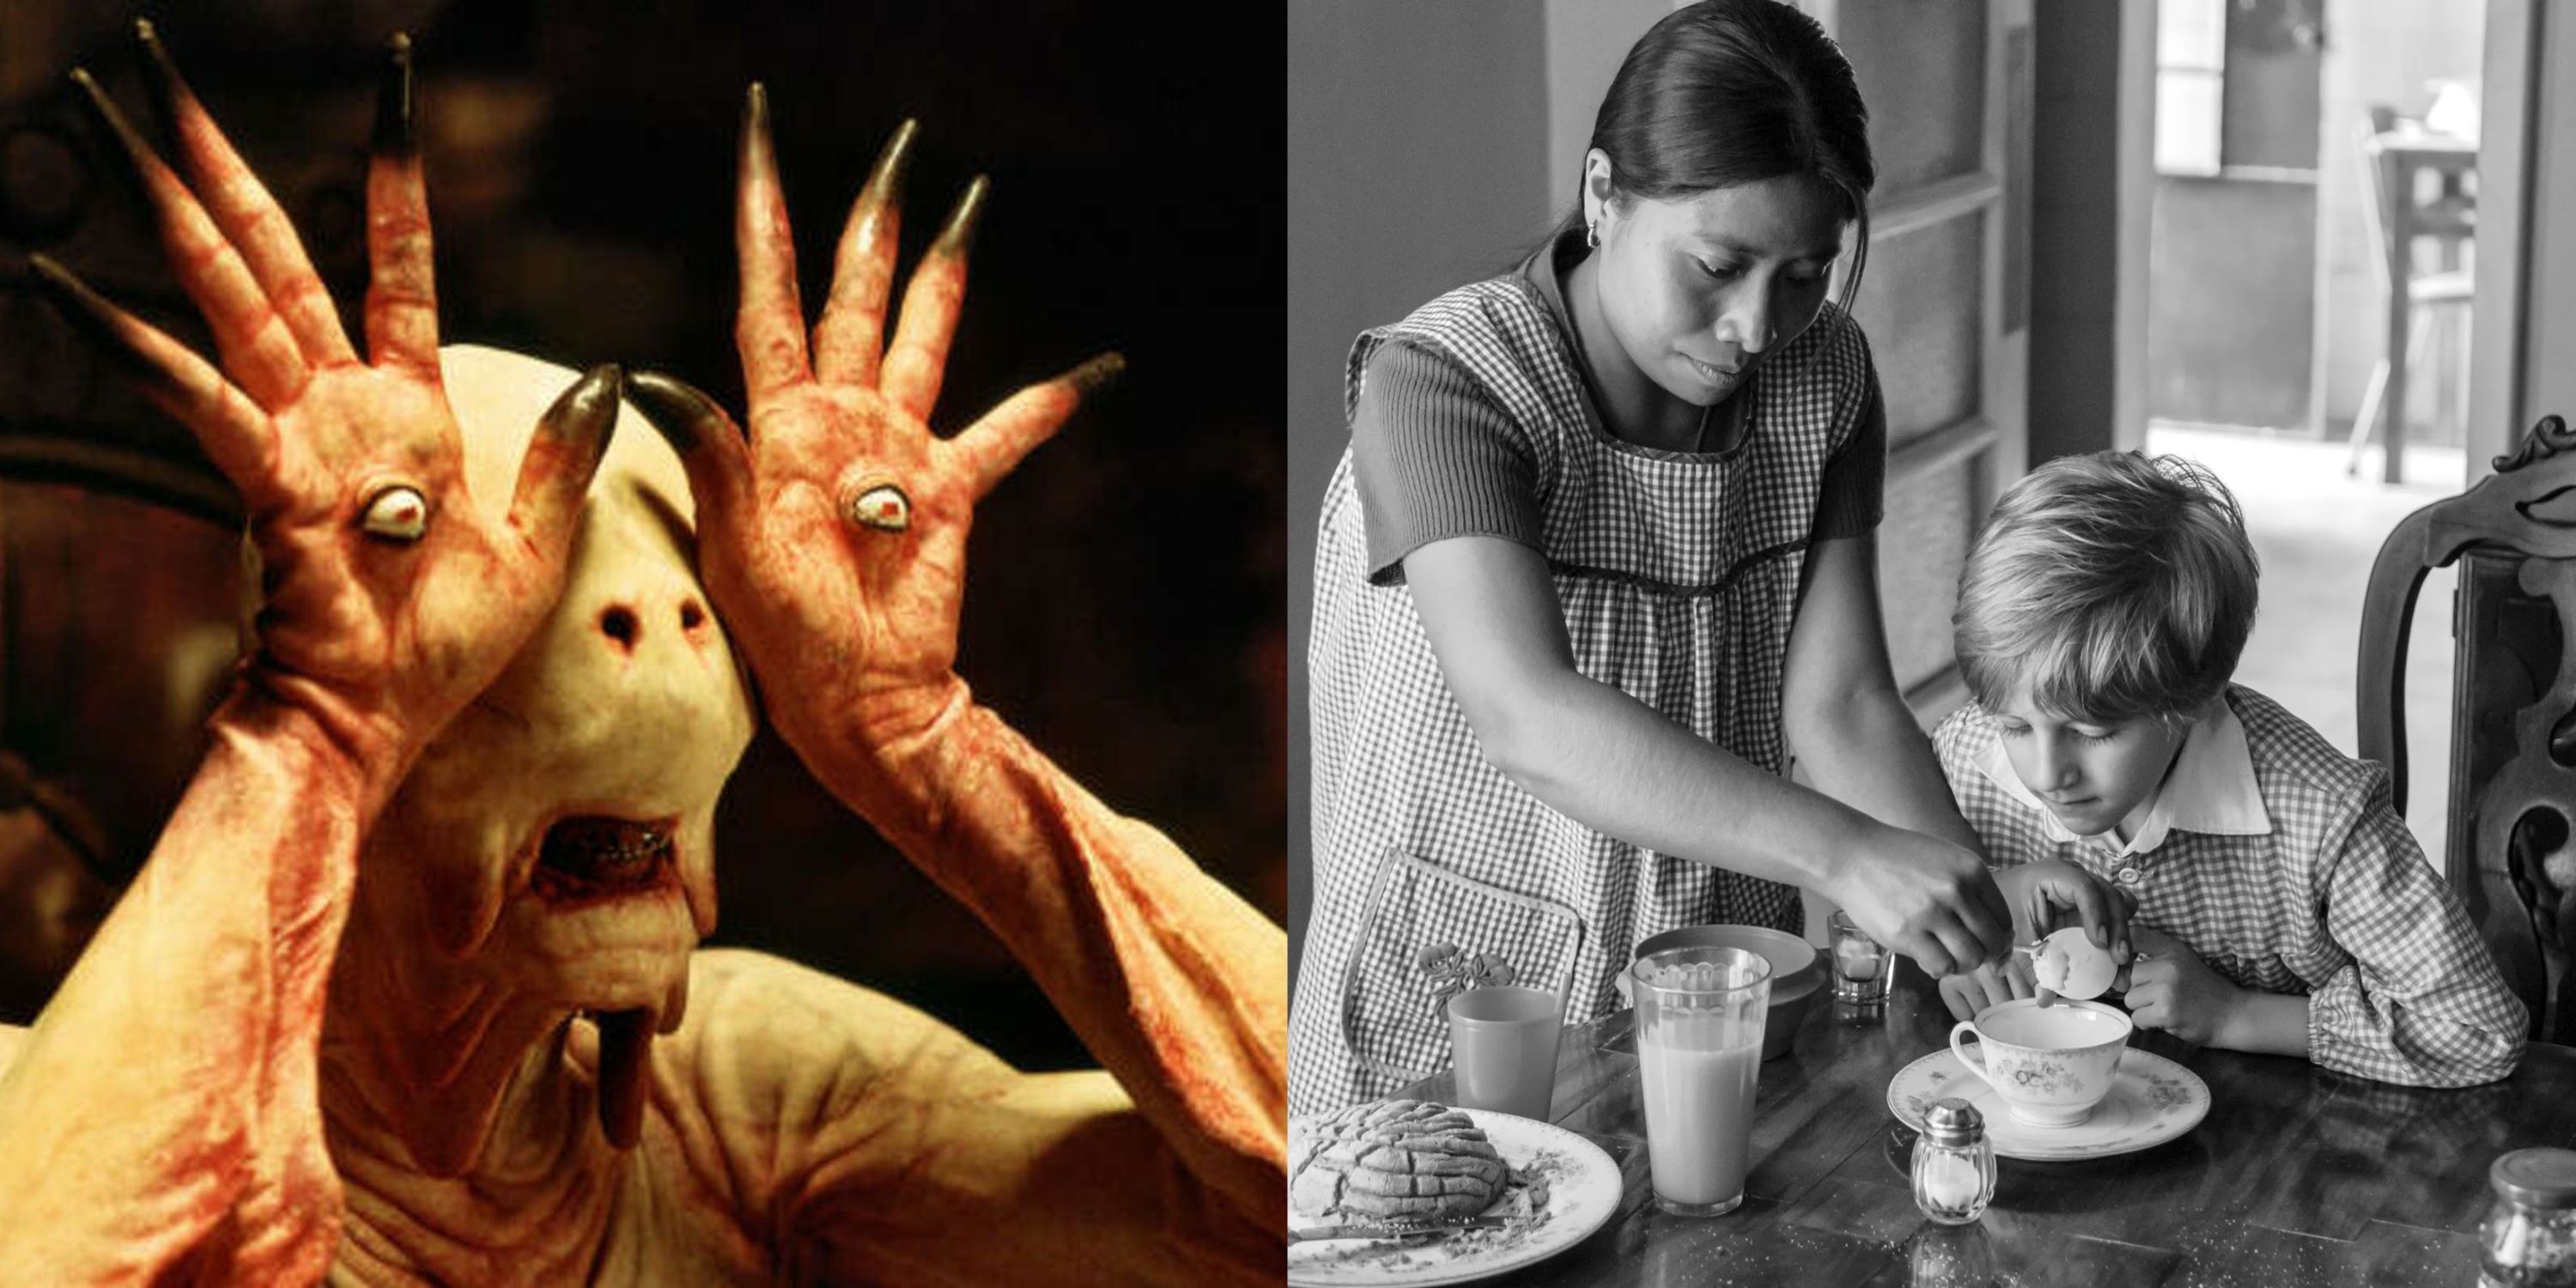 Split image of Pan's Labyrinth and Roma